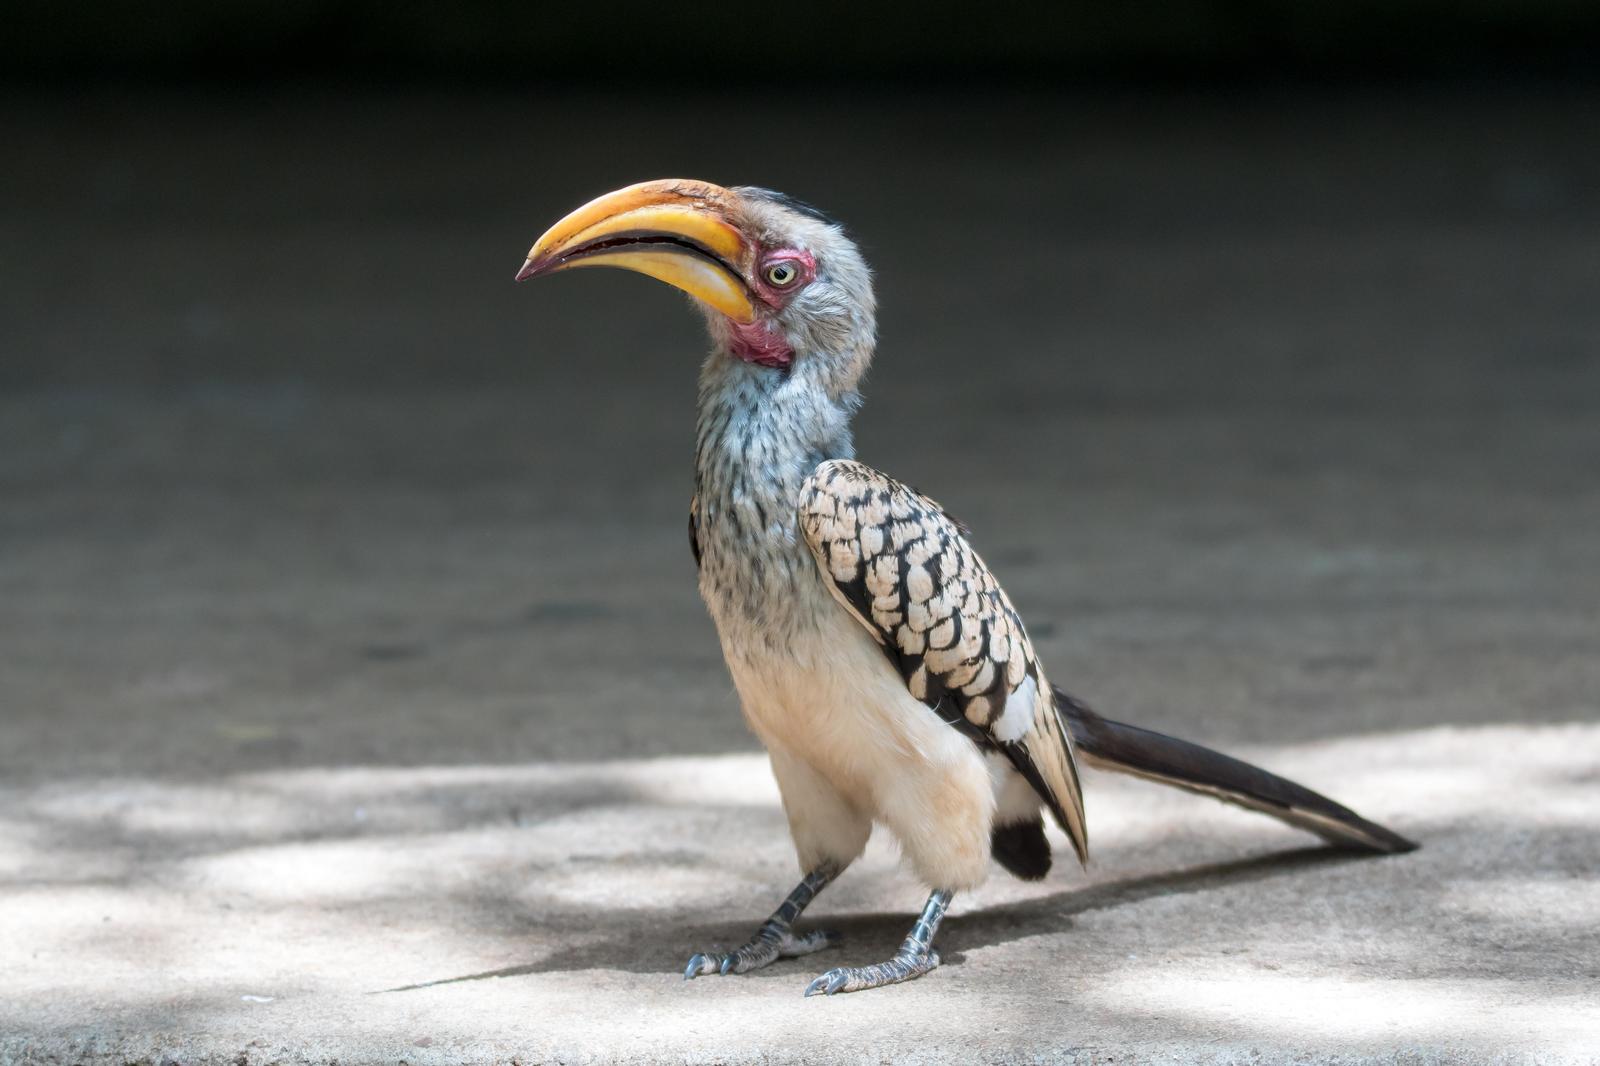 Southern Yellow-billed Hornbill Photo by Gerald Hoekstra